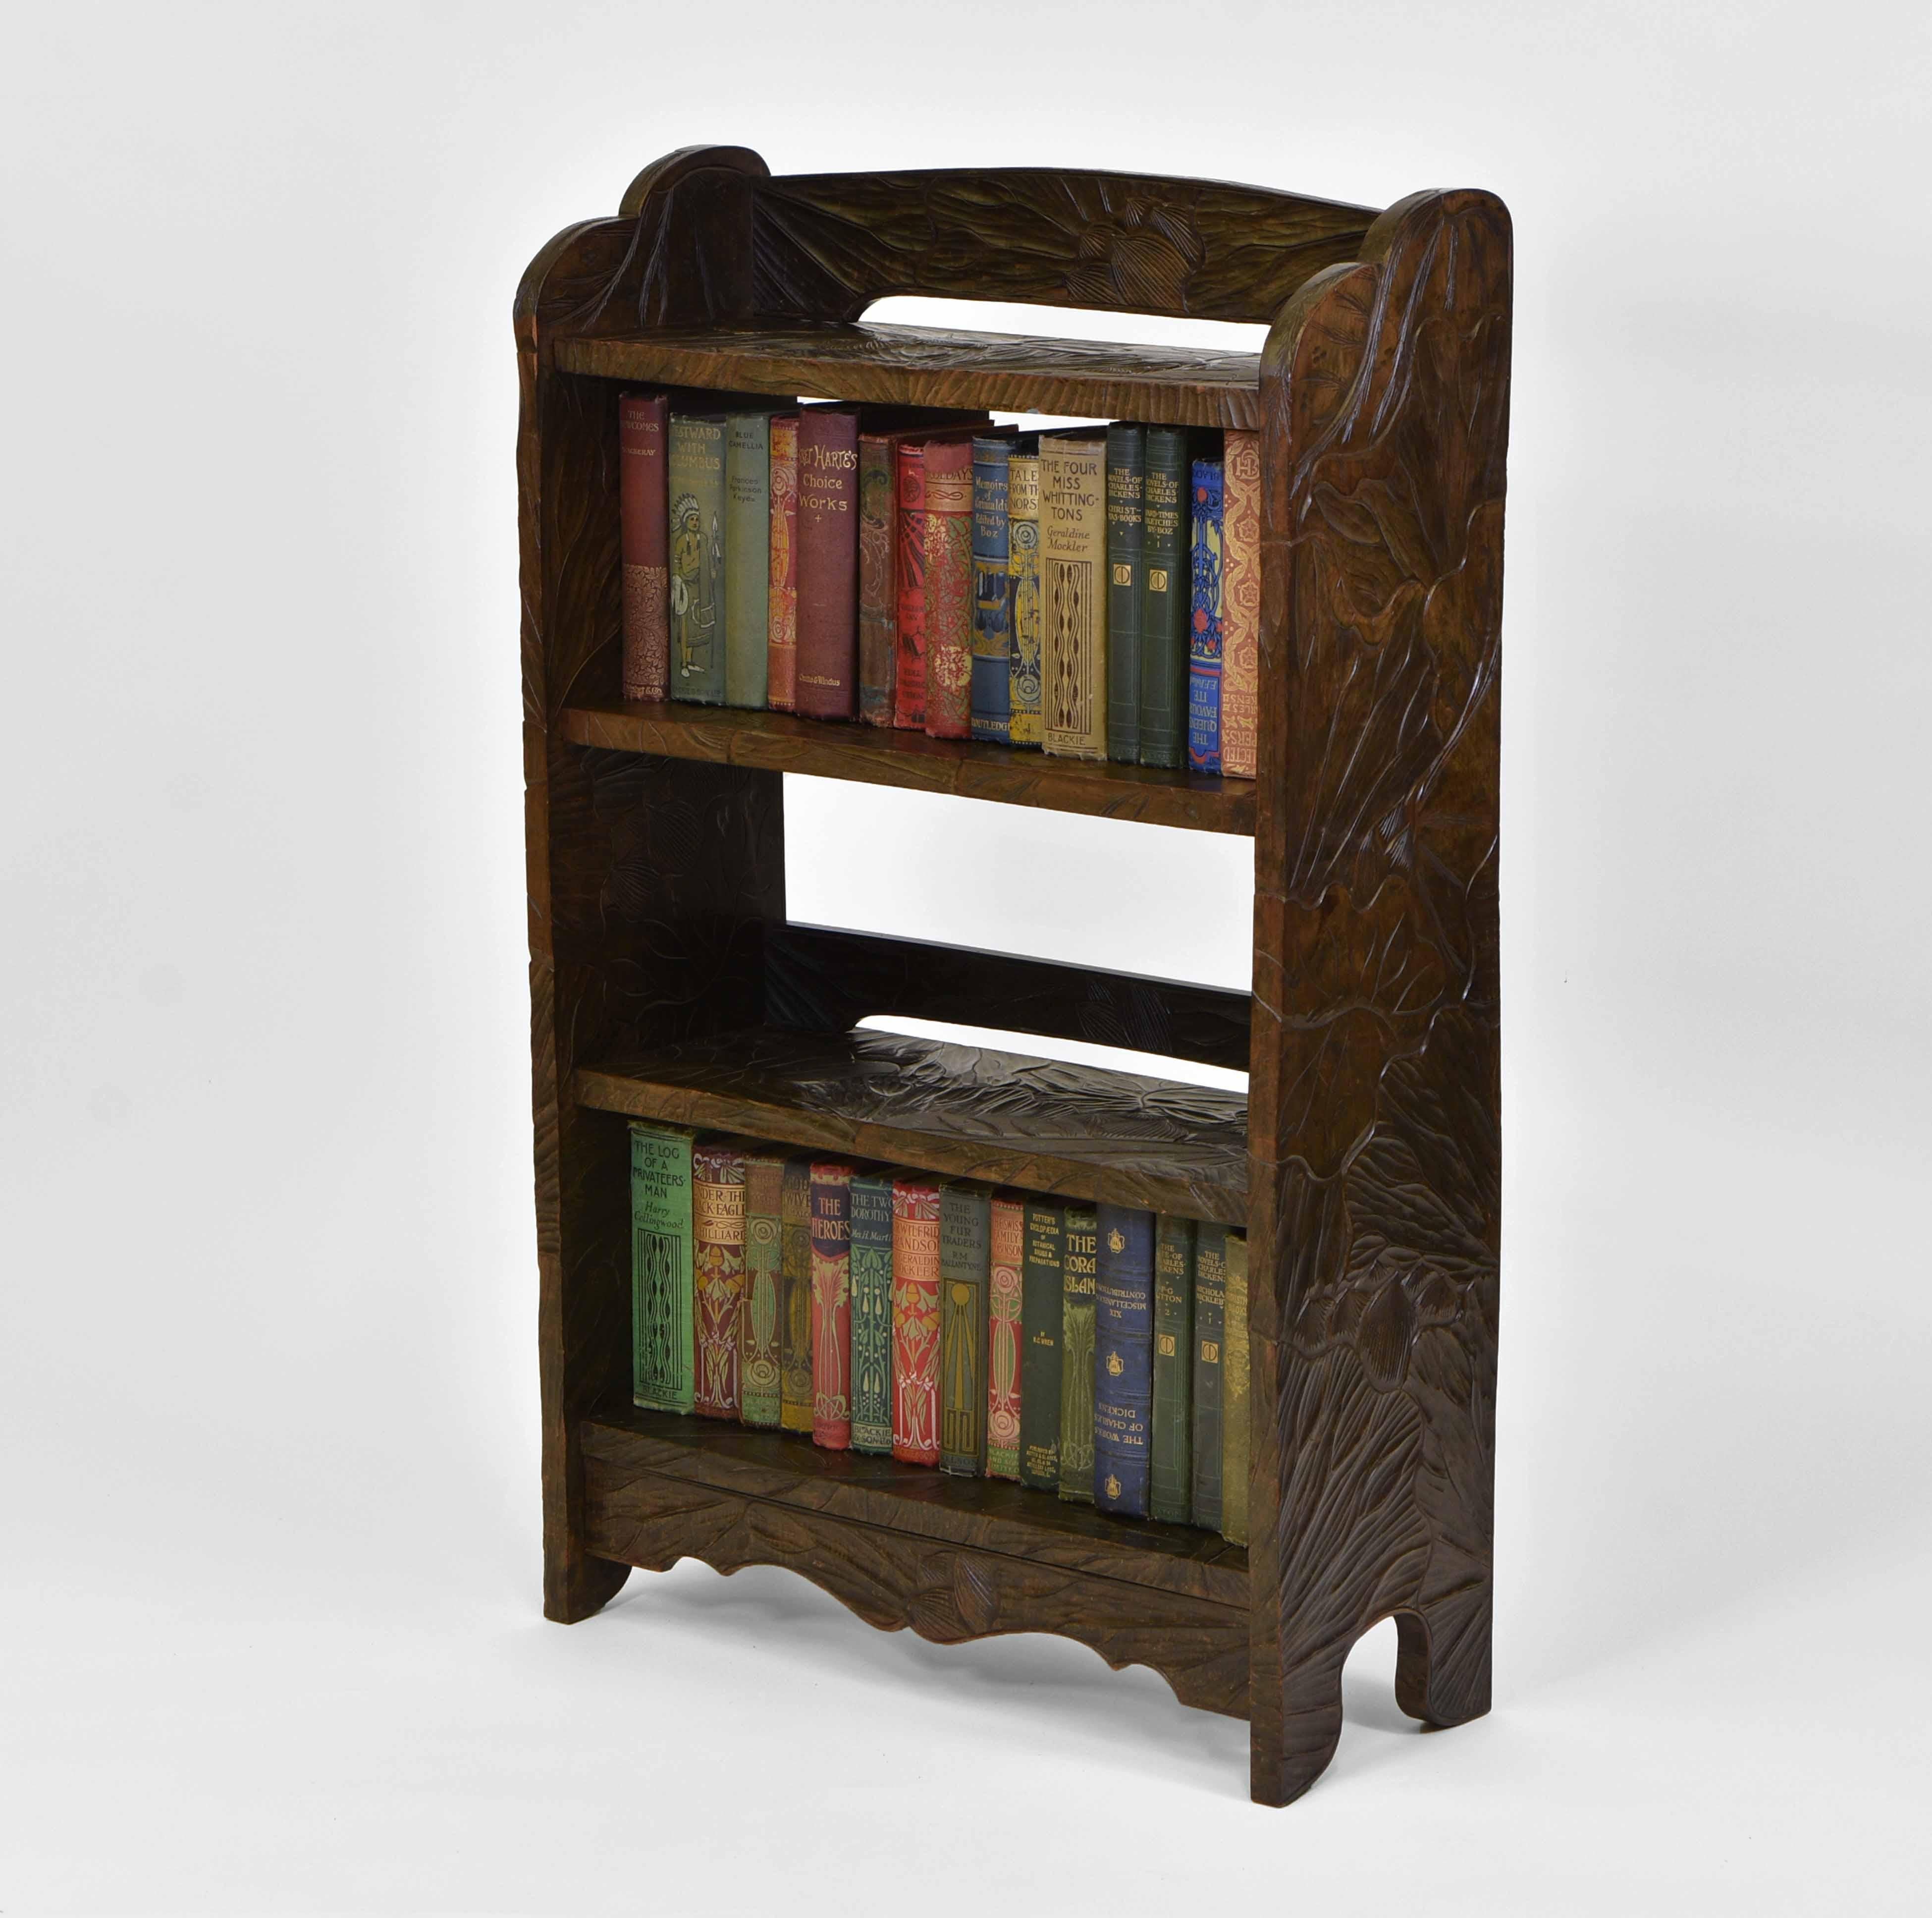 A Japanese fruitwood carved small open bookcase, retailed by Liberty & Co. Circa 1900.

These were commissioned by Liberty & Co, and hand-carved in Japan. The firm imported Middle Eastern and Asian goods sympathetic to the ideals of the Art